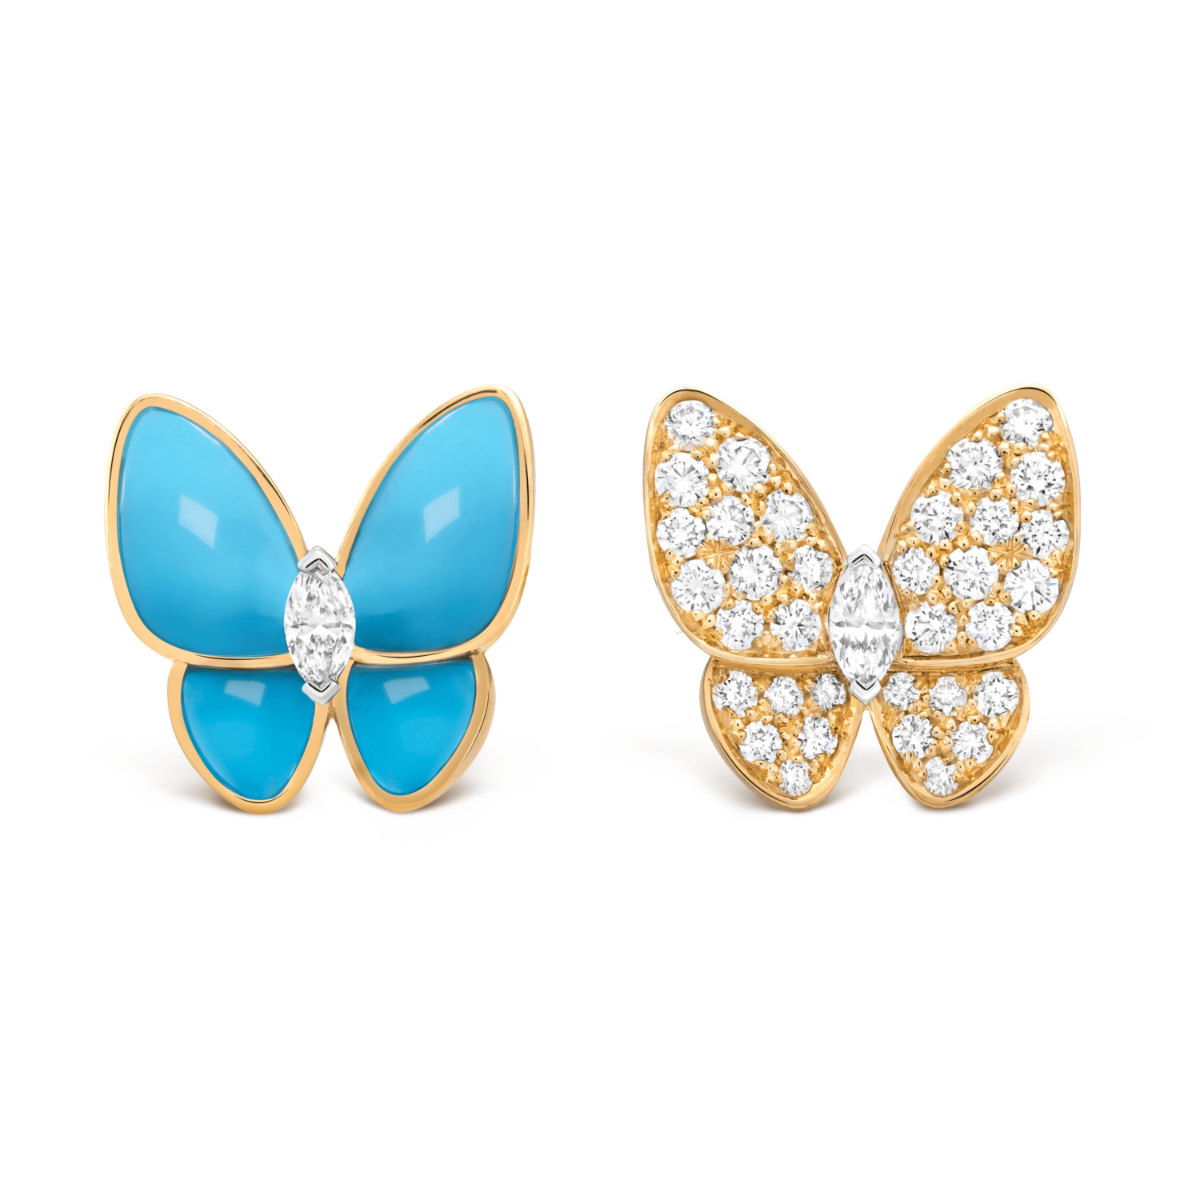 Van Cleef & Arpels' New Two Butterfly: Nature In Full Flight